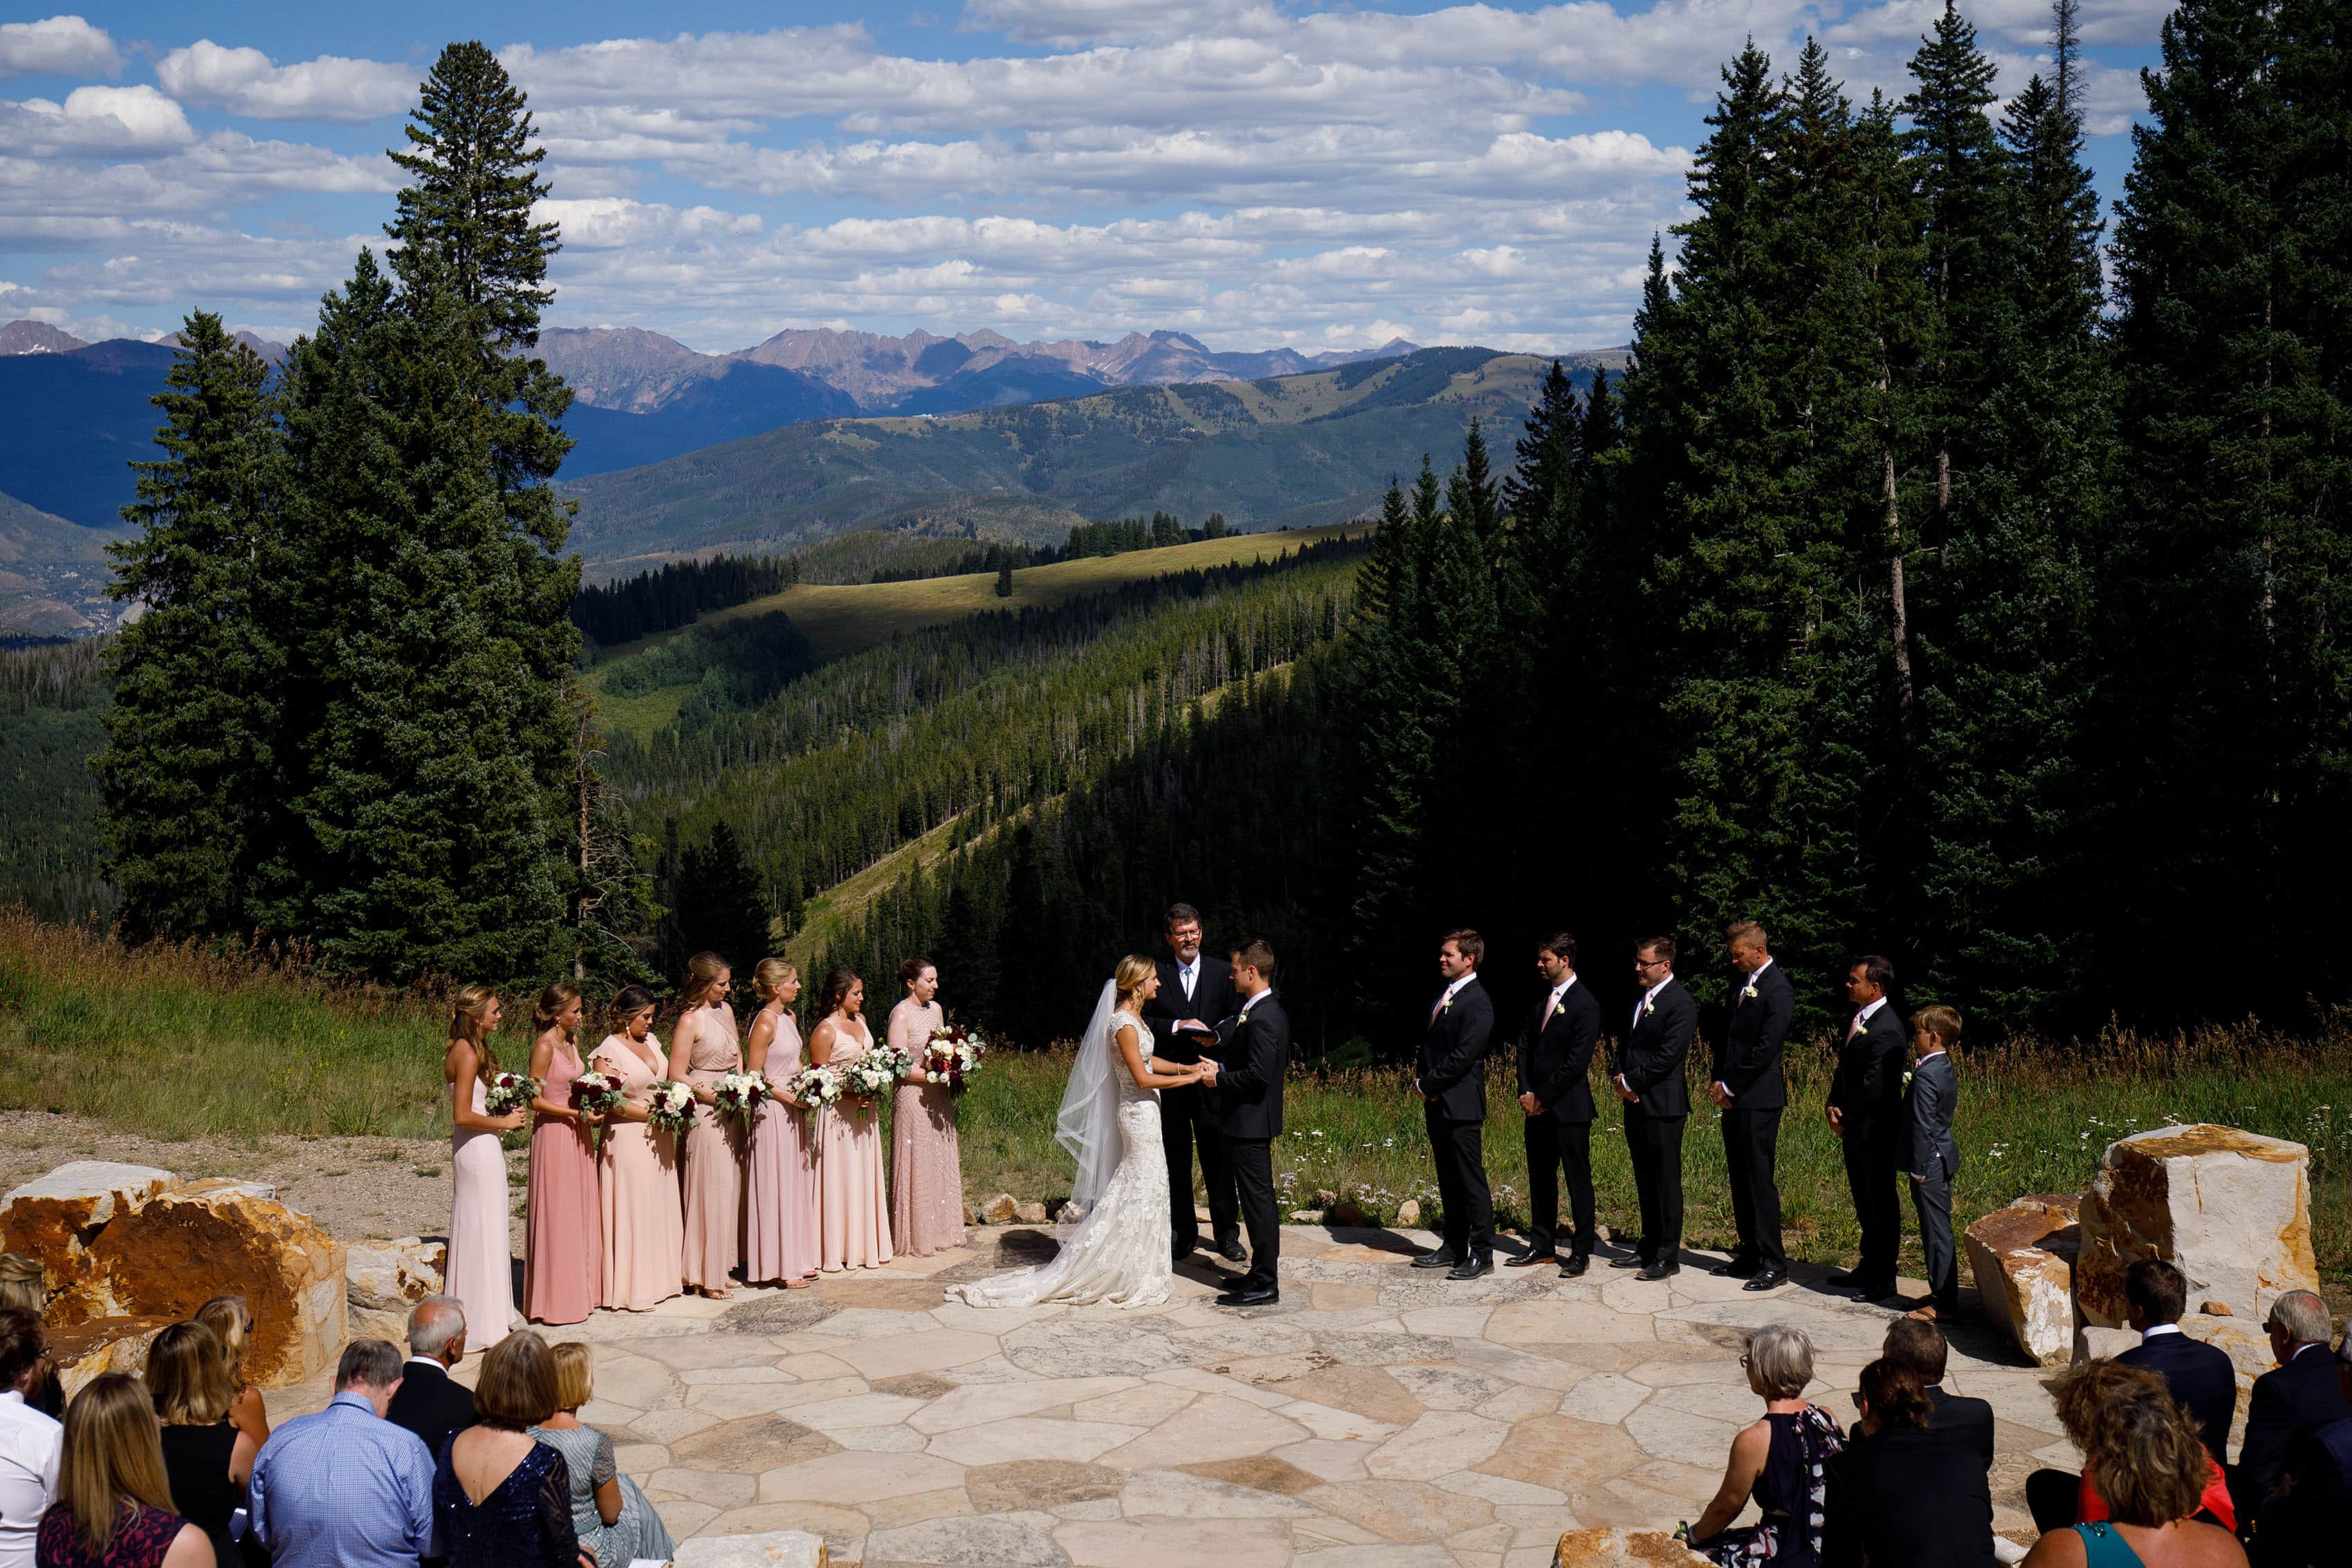 Wedding ceremony at the Beaver Creek wedding deck on a sunny September day